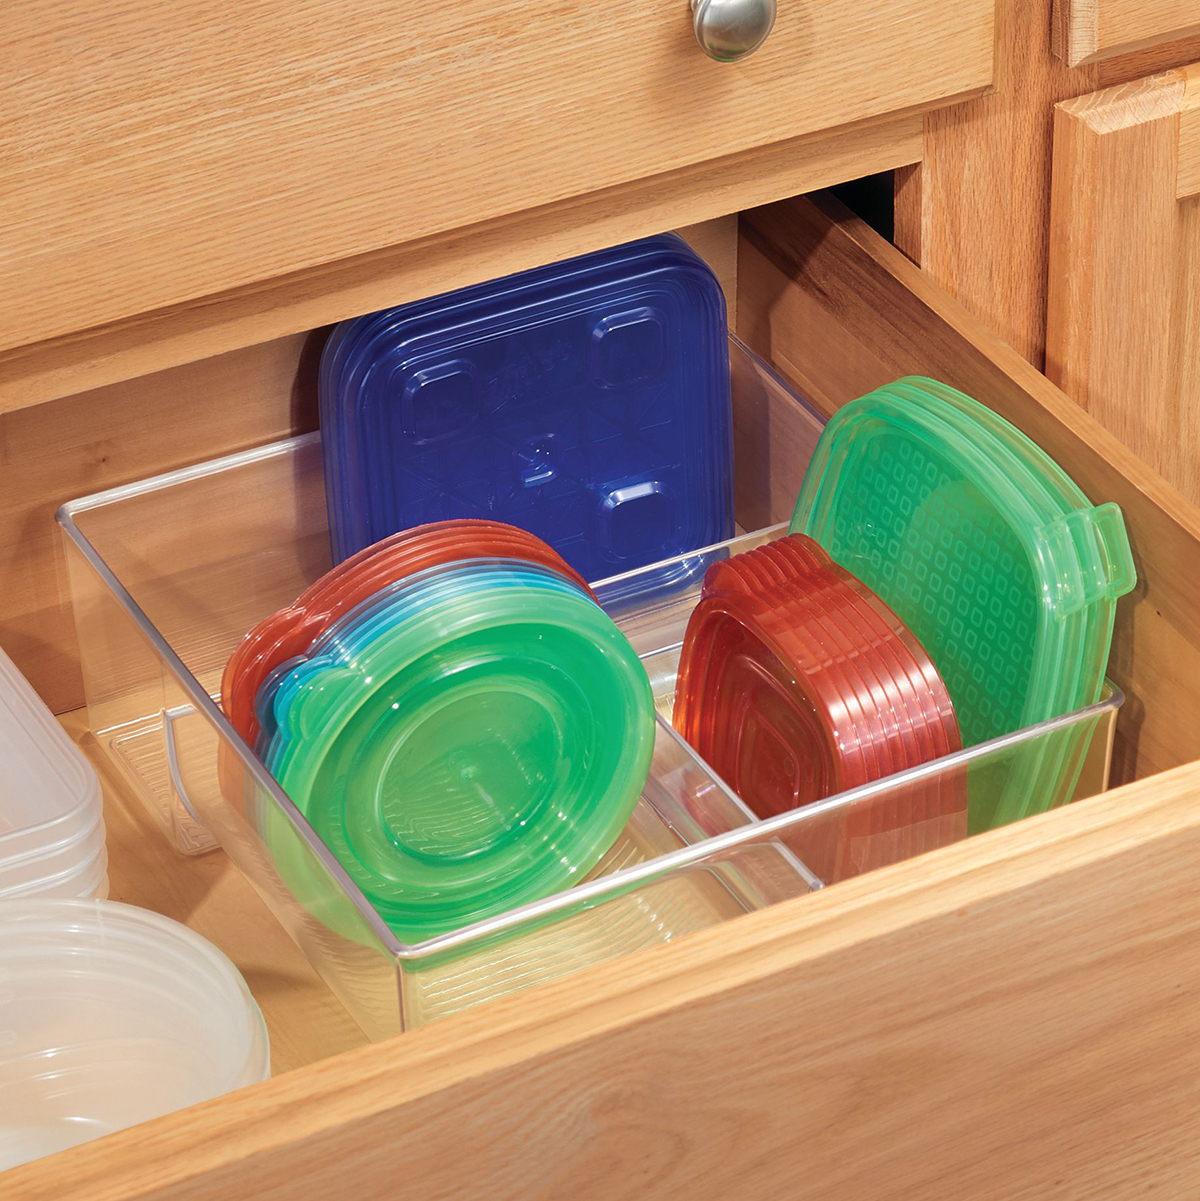 https://www.containerstore.com/catalogimages/360842/10077191-Linus-Large-Lid-Organizer-V.jpg